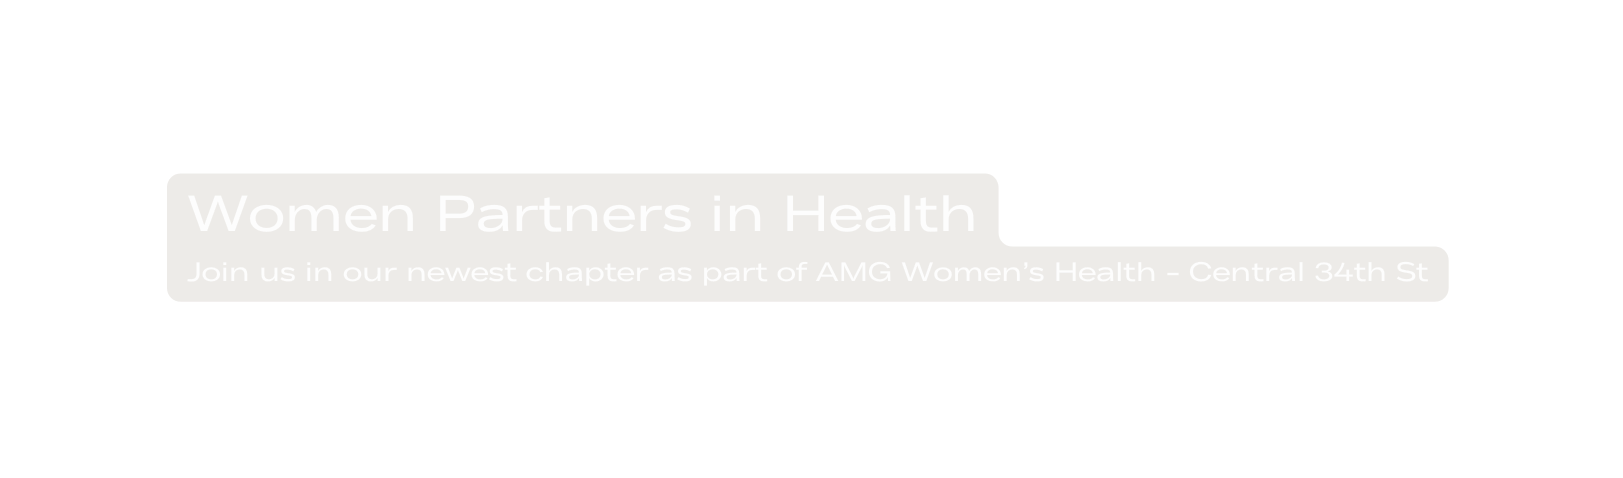 Women Partners in Health Join us in our newest chapter as part of AMG Women s Health Central 34th St